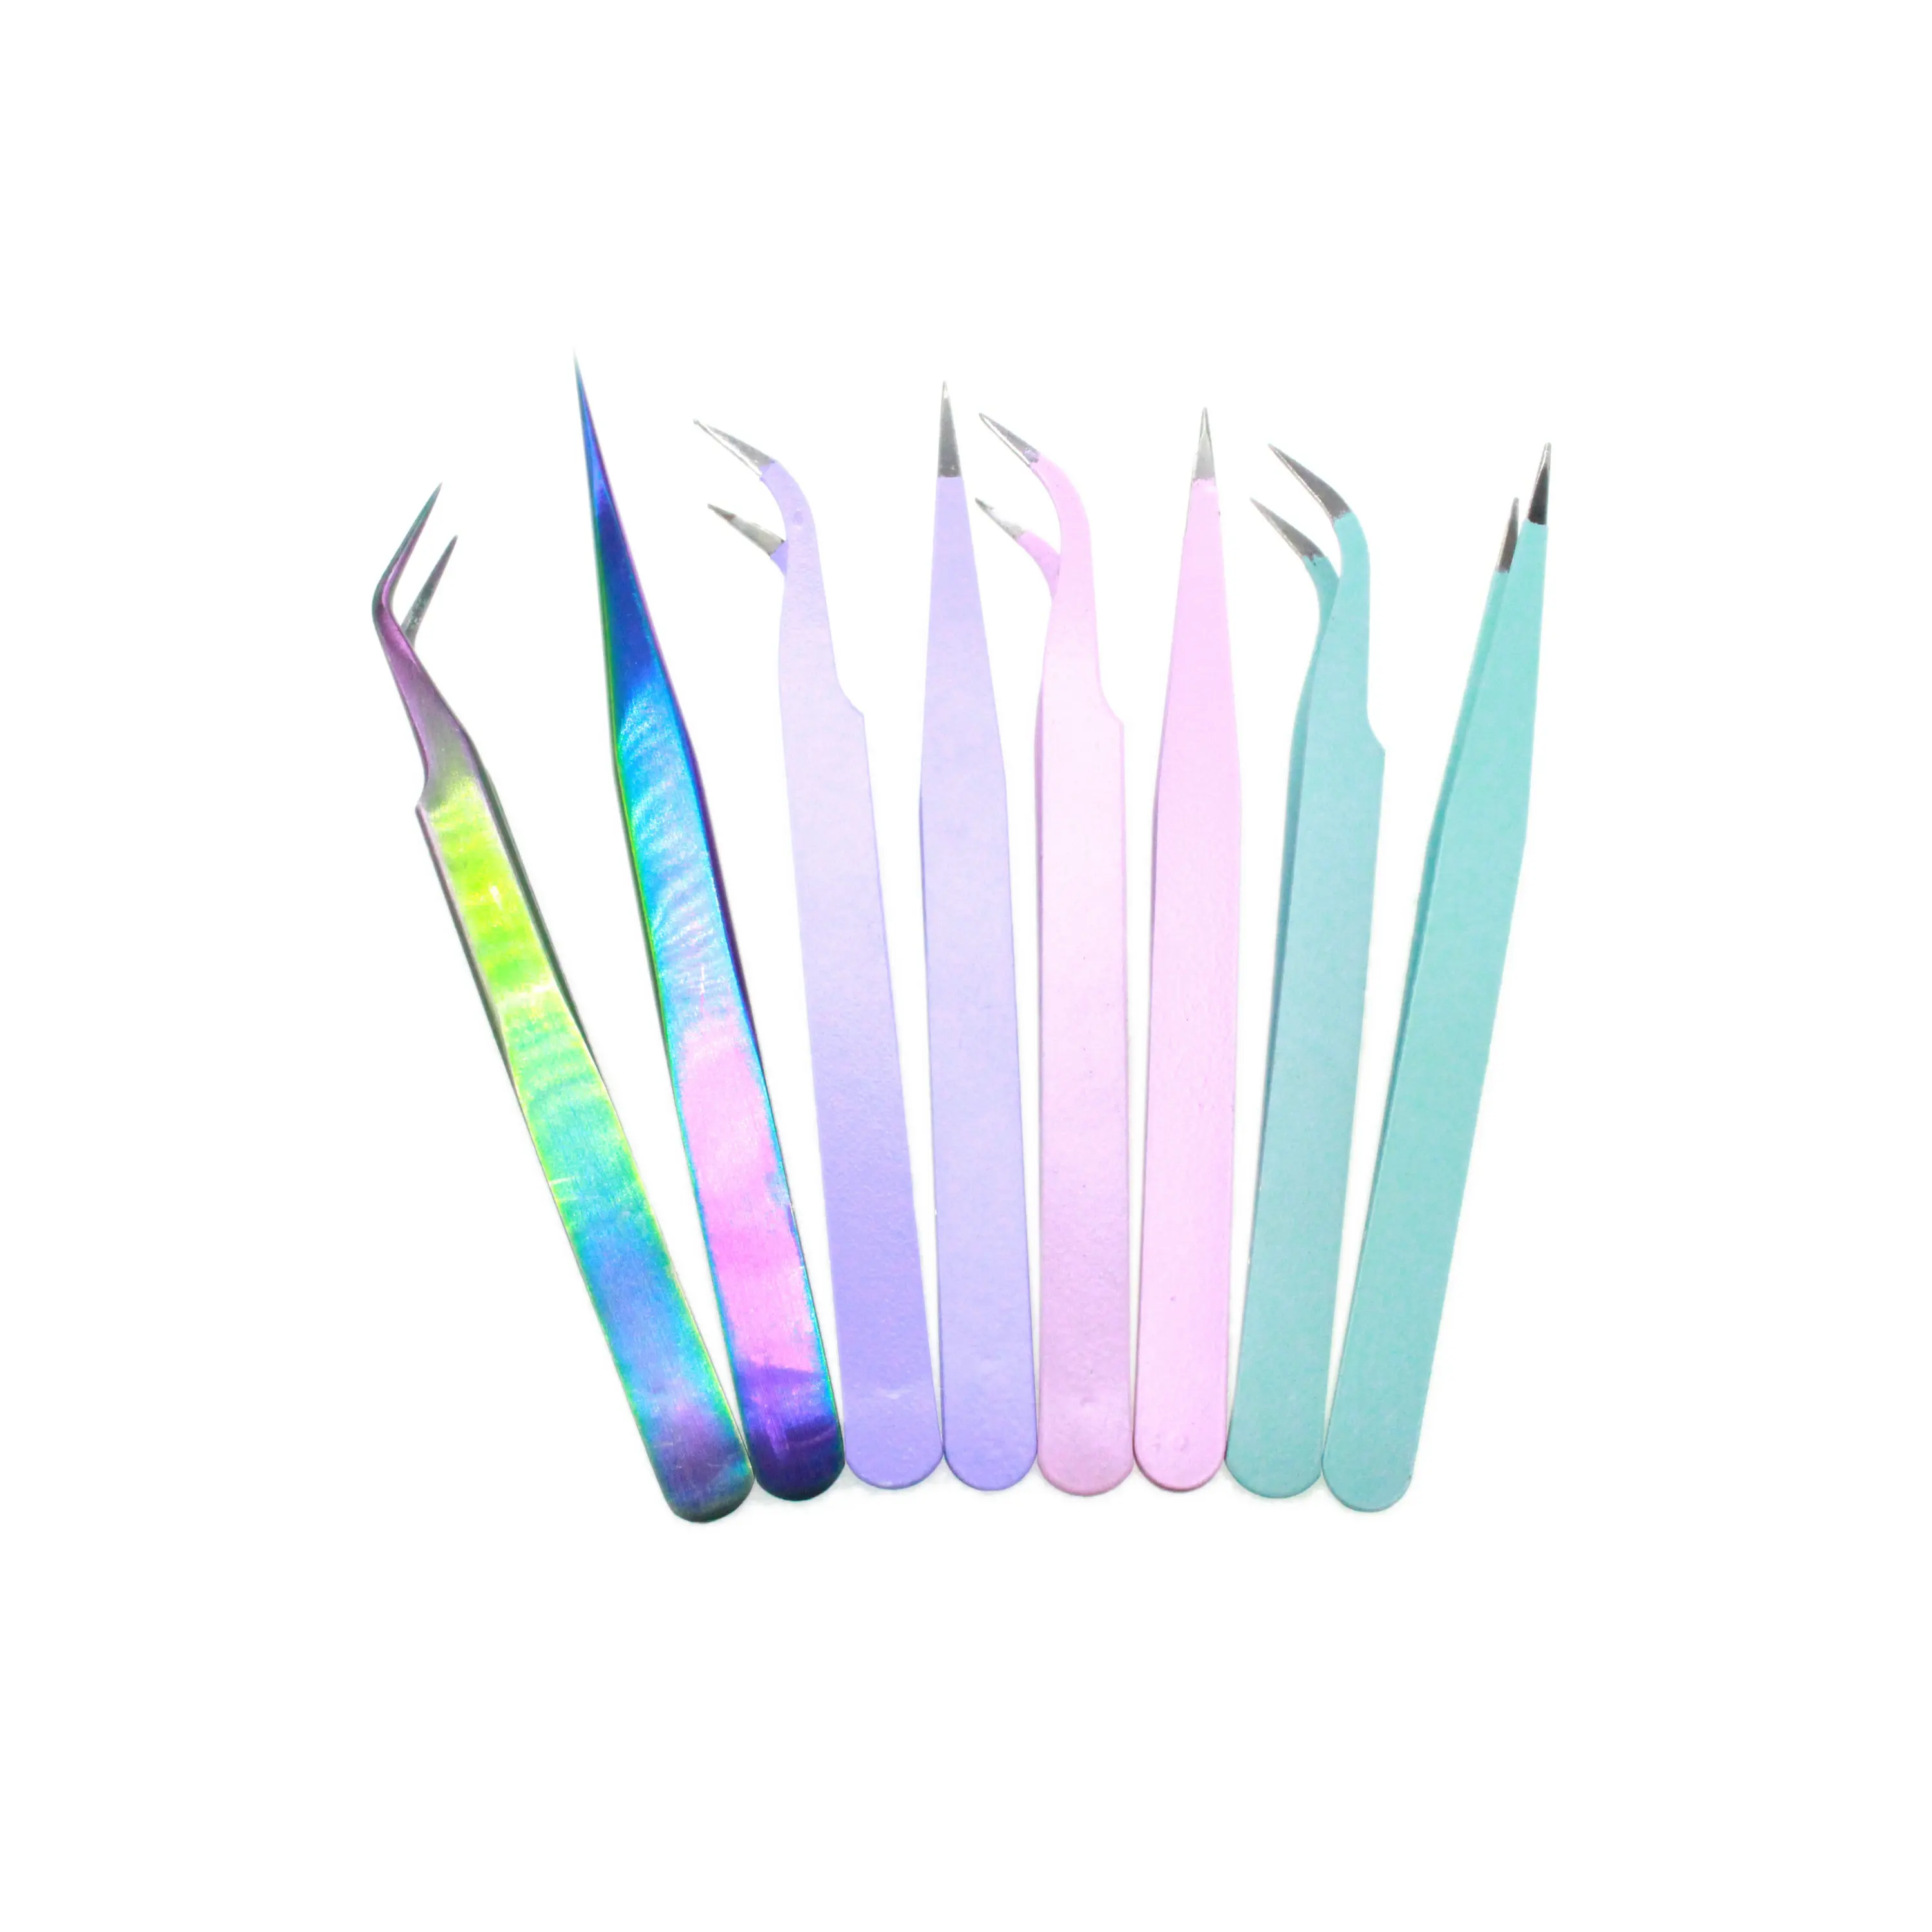 Colorful Stainless Steel DIY Beauty Manicure ESD Tweezers Accessory Jewelry Fillings Handmade UV Resin Mould Nail Art Tool Craft